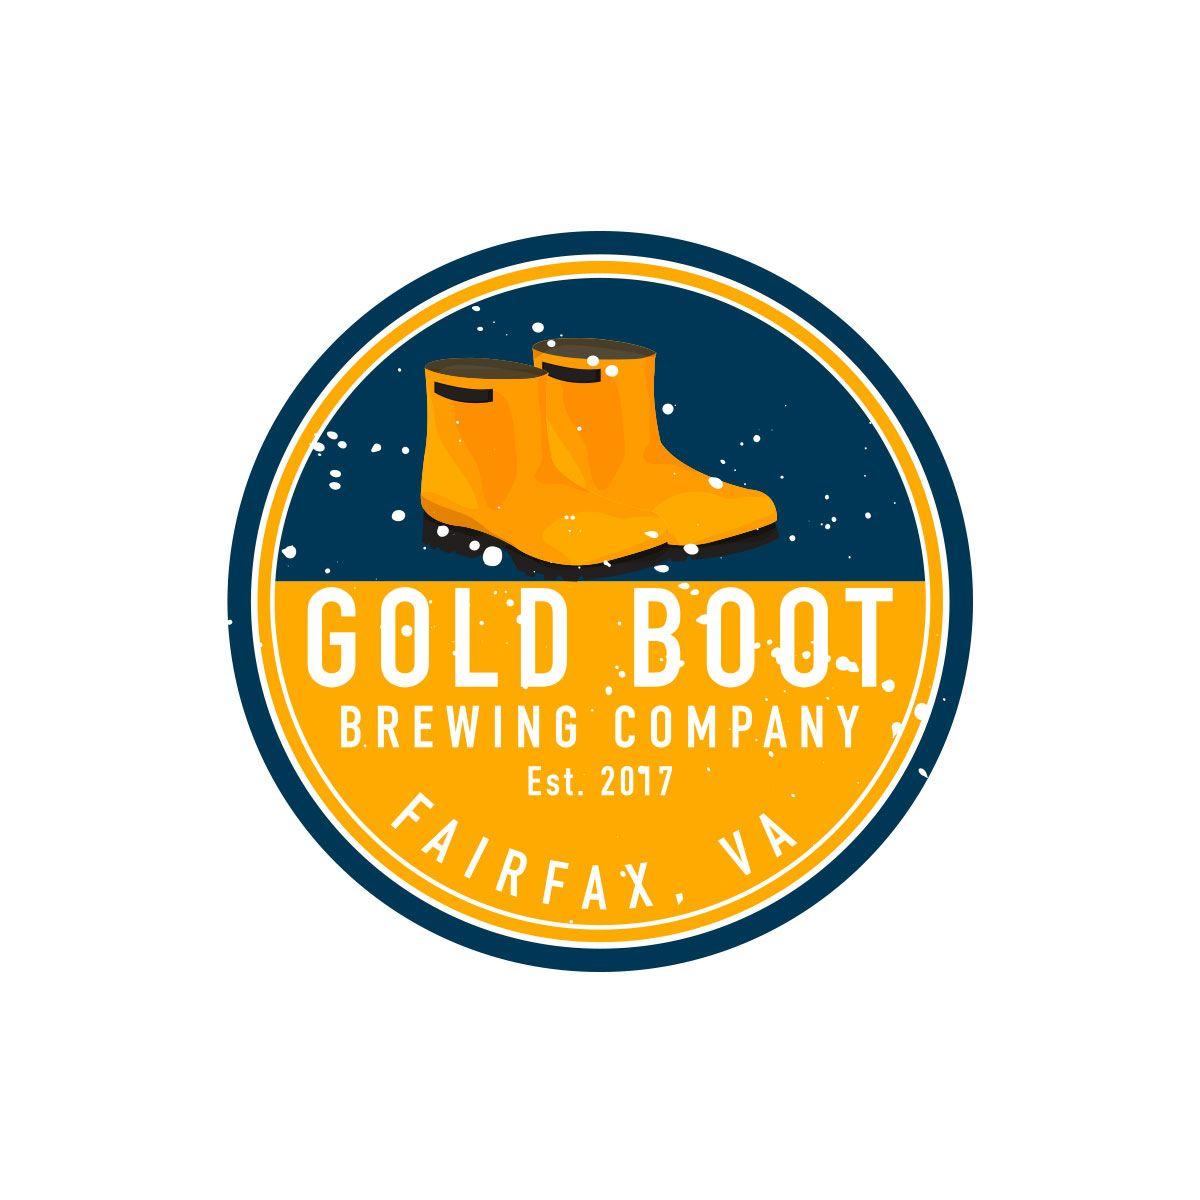 Gold V Company Logo - Personable, Colorful, It Company Logo Design for Gold Boot Brewing ...